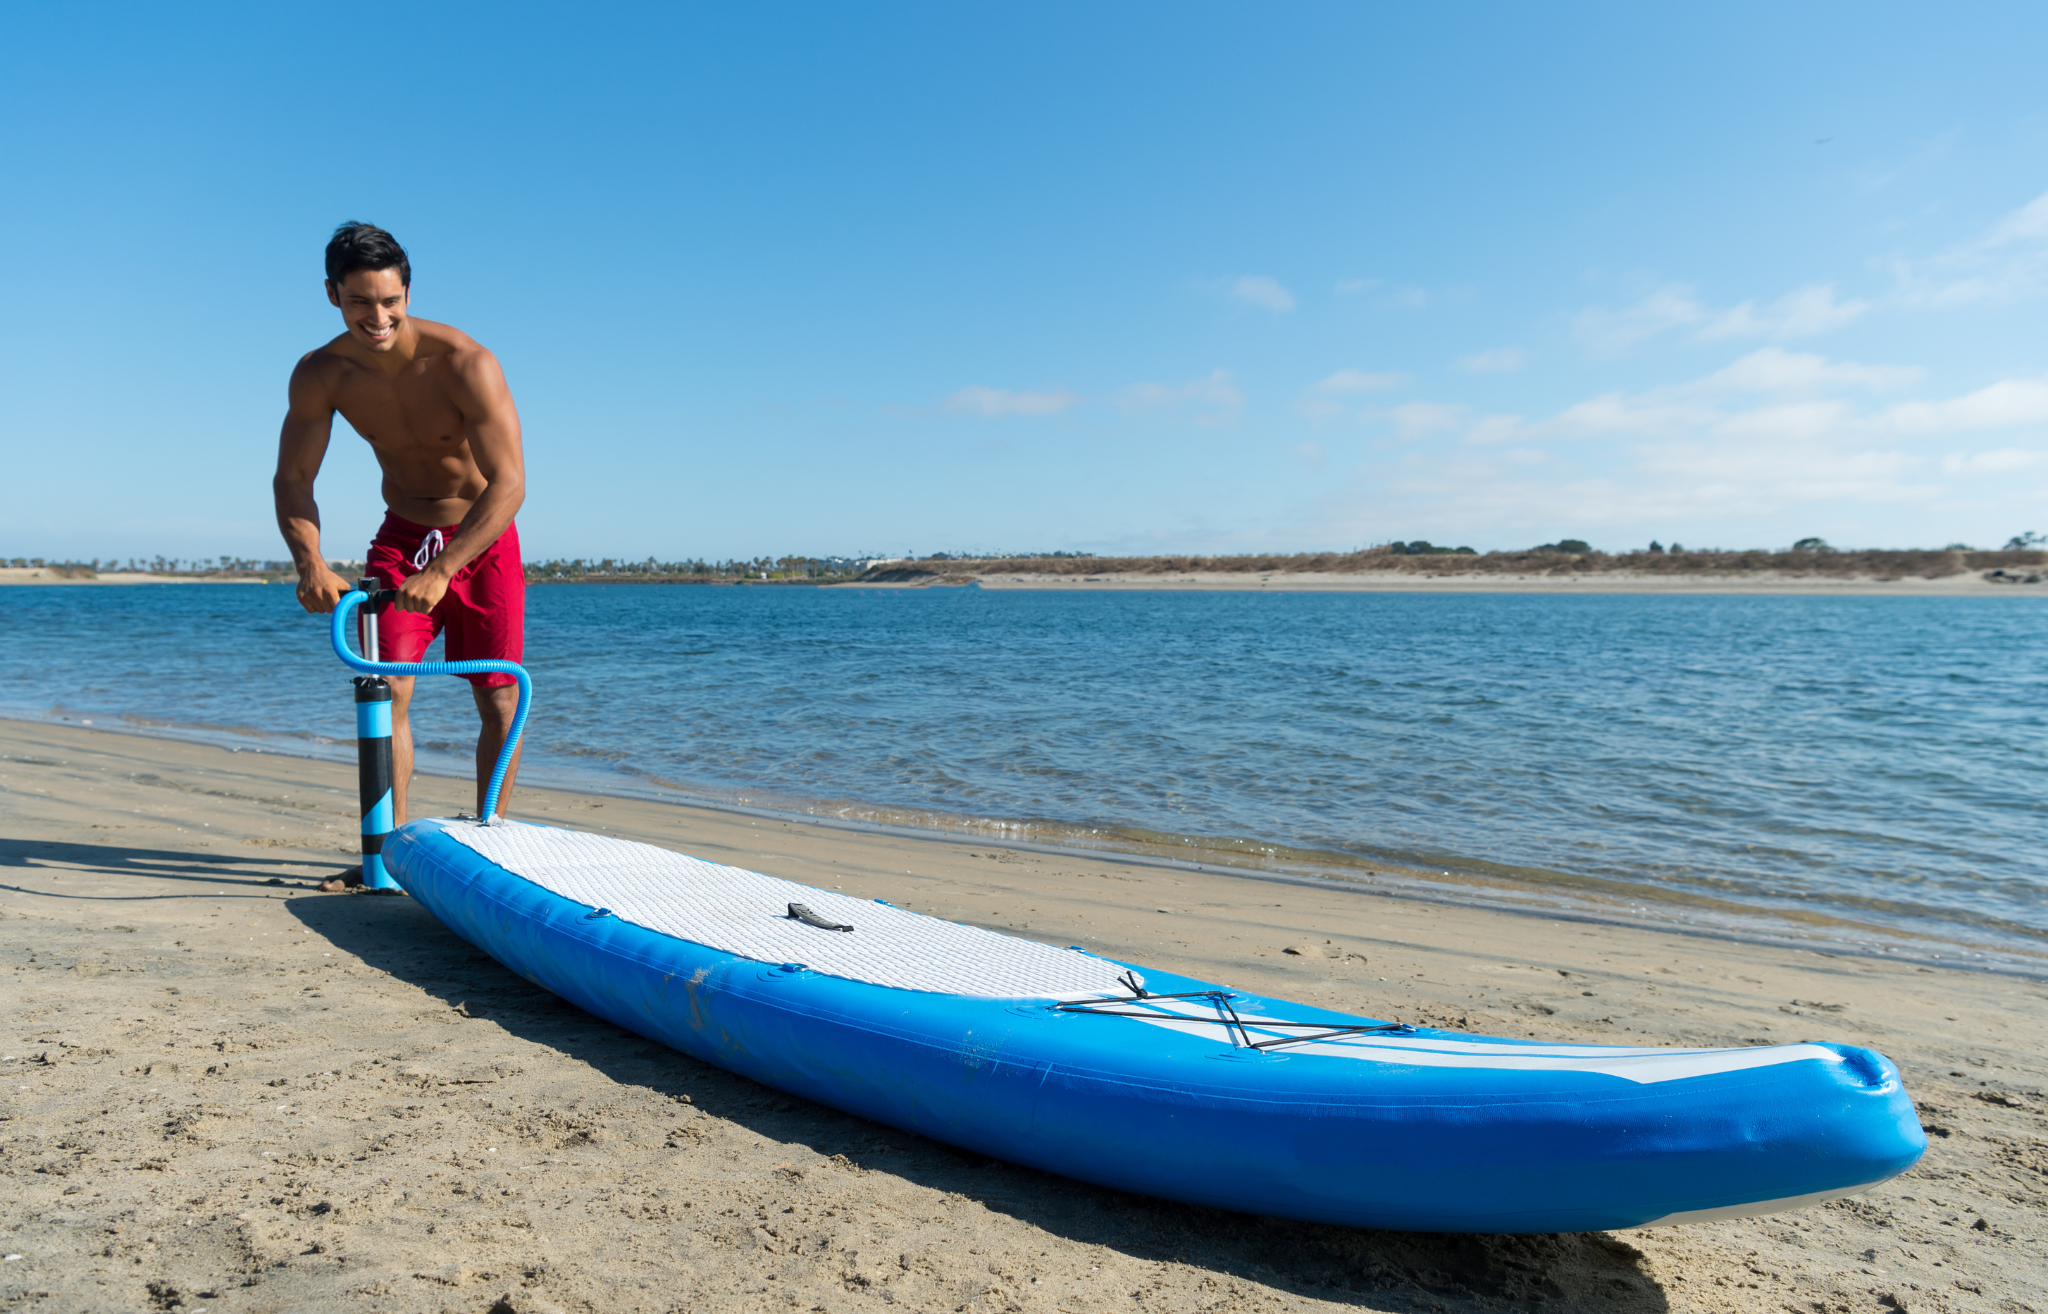 Man on beach inflating stand up paddle board - Adventure Wise Travel Gear